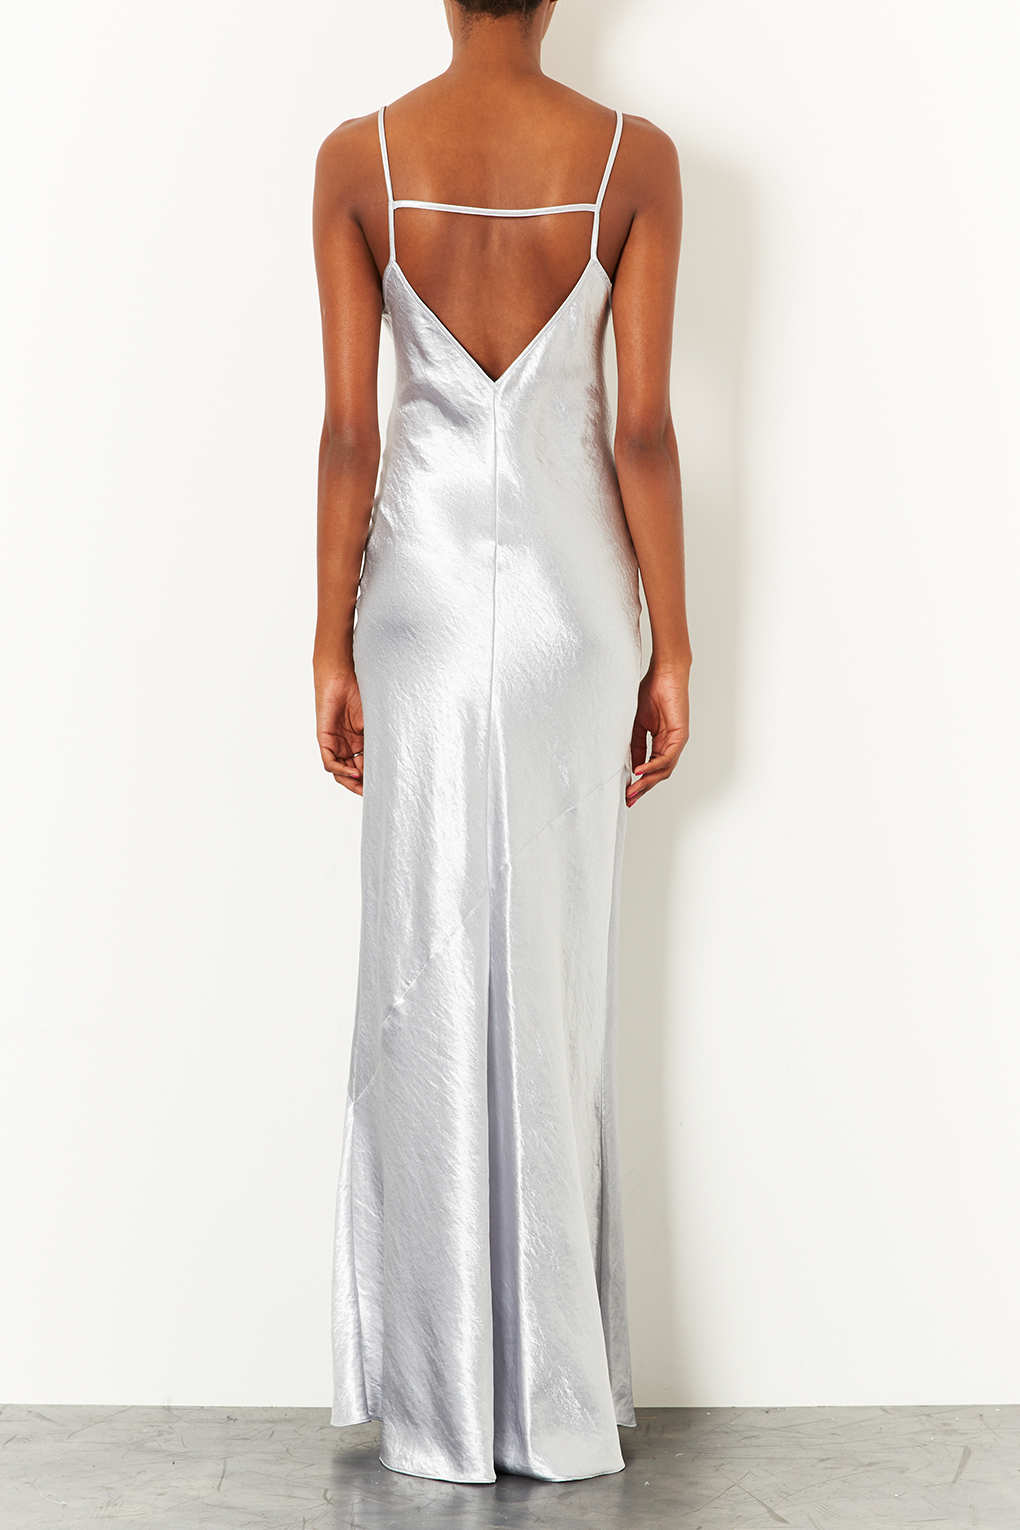 Lyst - Topshop Strappy Satin Maxi Dress in White